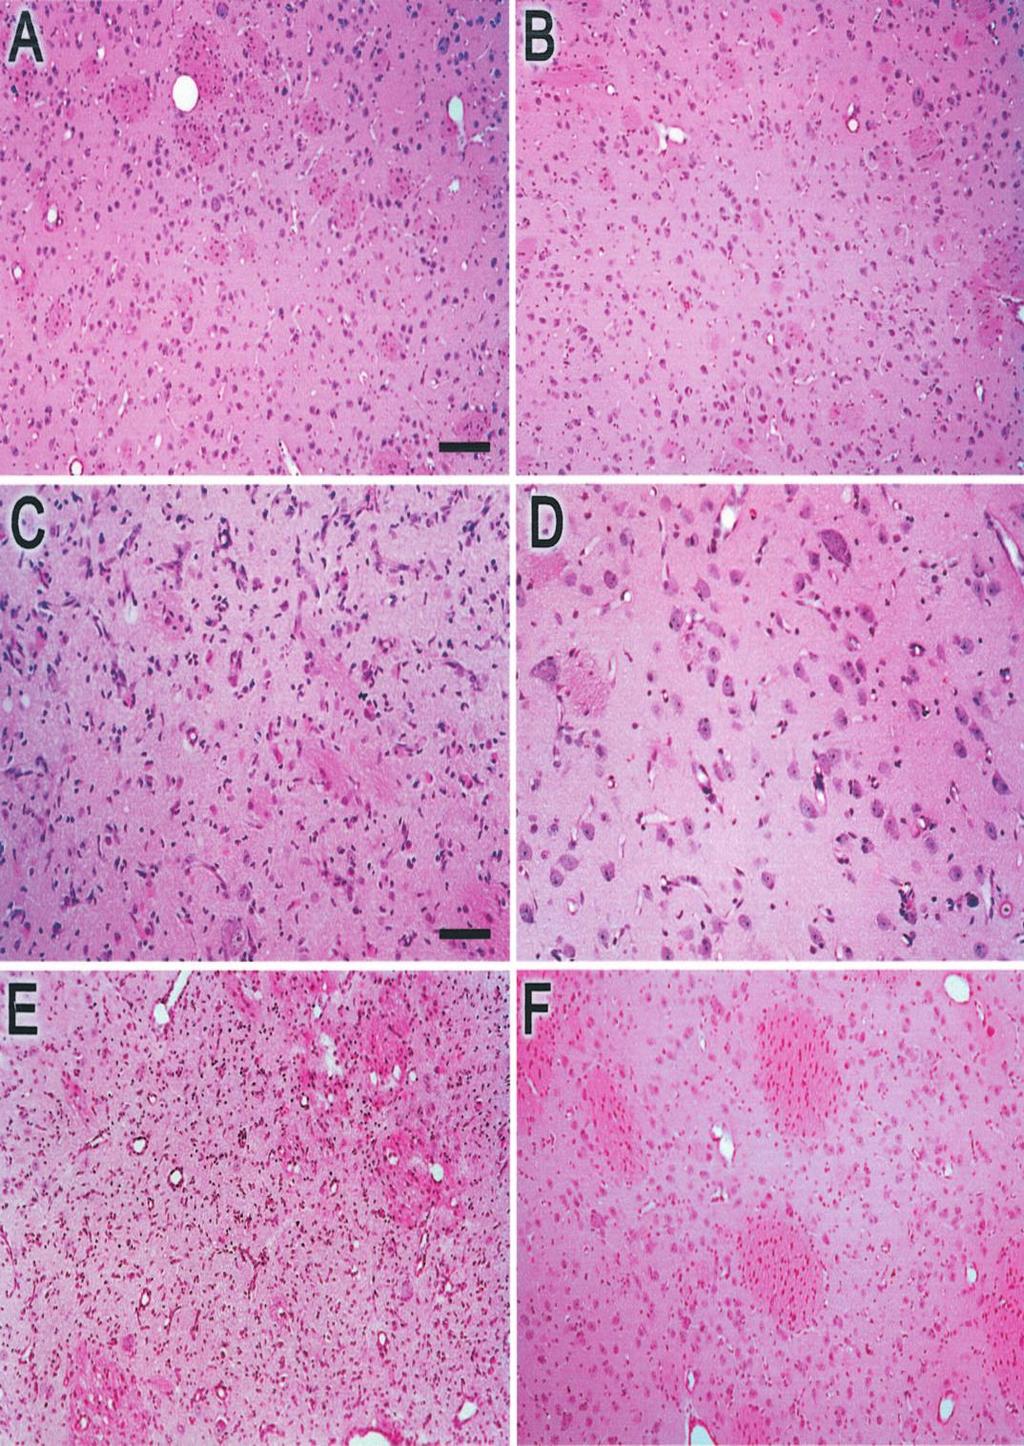 Hypothermia for 24 Hours After Asphyxic Cardiac Arrest in Piglets Provides Striatal Neuroprotection That Is Sustained 10 Days After Rewarming Dawn M.